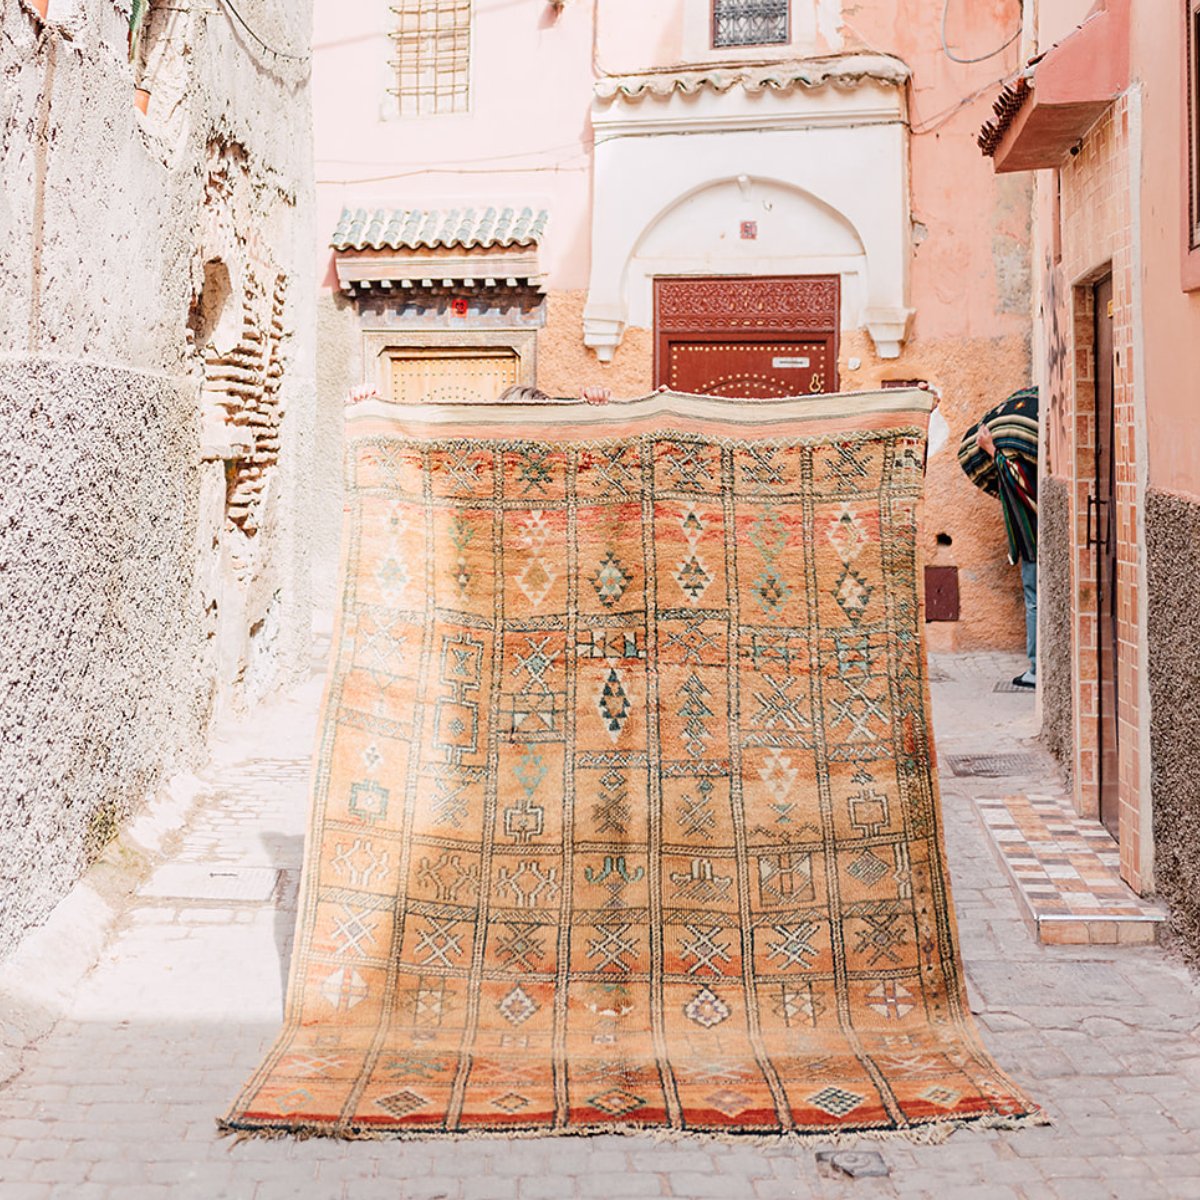 A Zemmour vintage Moroccan rugs being held up in the street in Marrakech, Morocco - Nouvelle Nomad